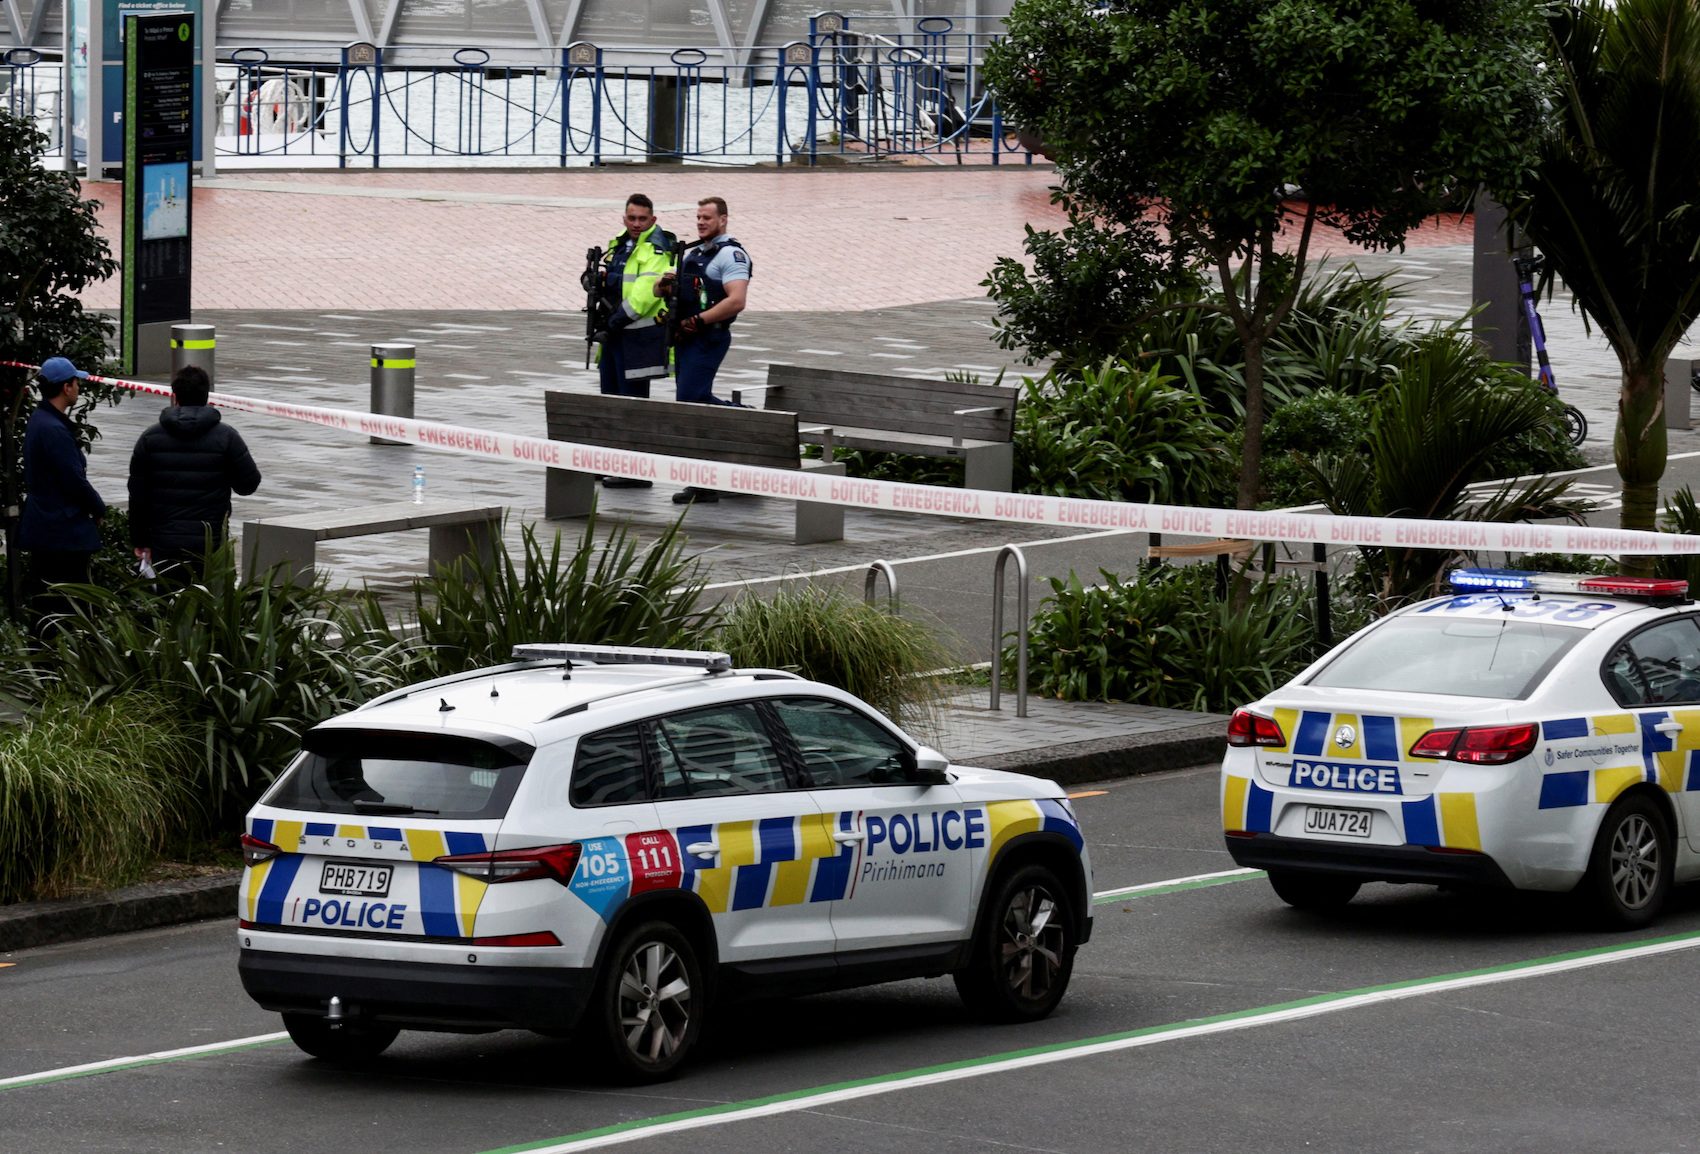 New Zealand shooter kills 2 on eve of Women’s Soccer World Cup